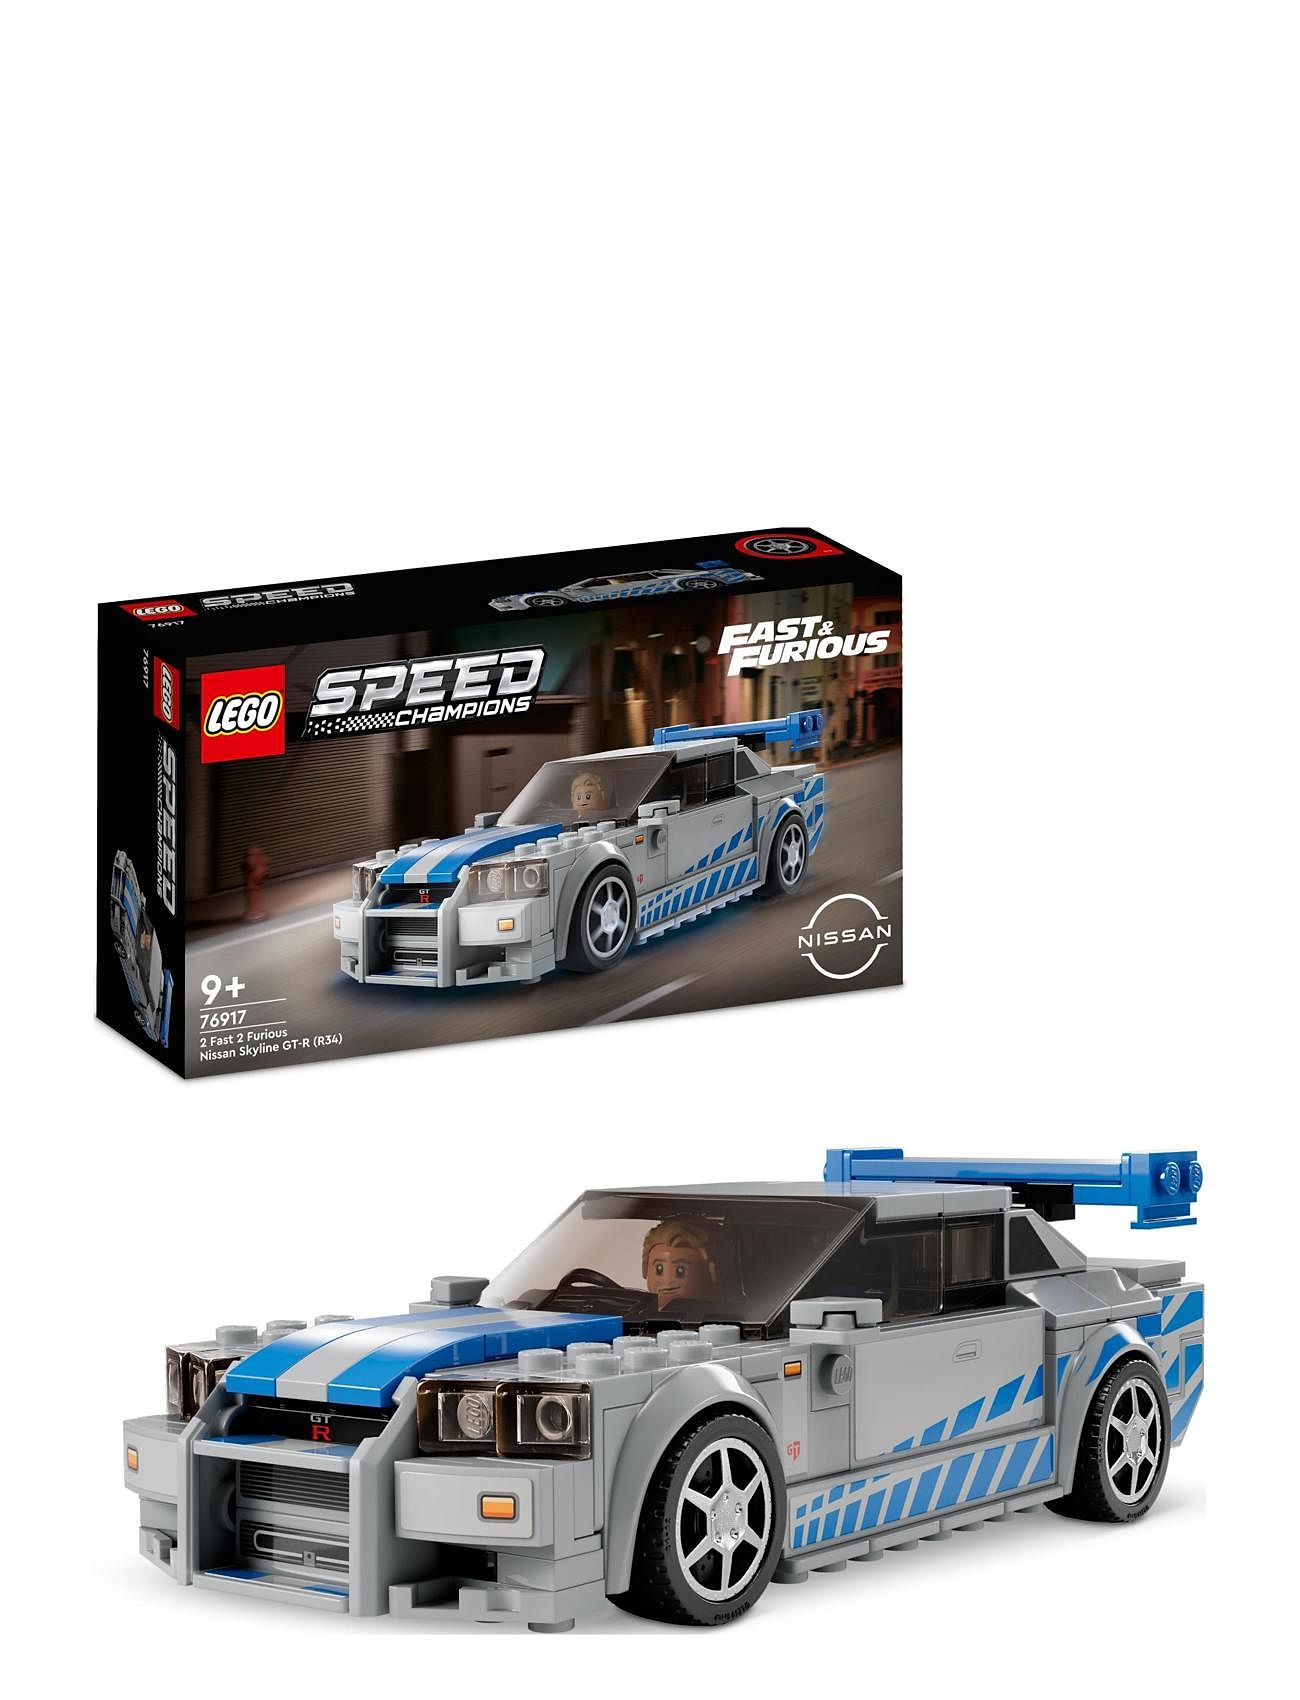 2 Fast 2 Furious Nissan Skyline Gt-R  Toys Lego Toys Lego speed Champions Multi/patterned LEGO